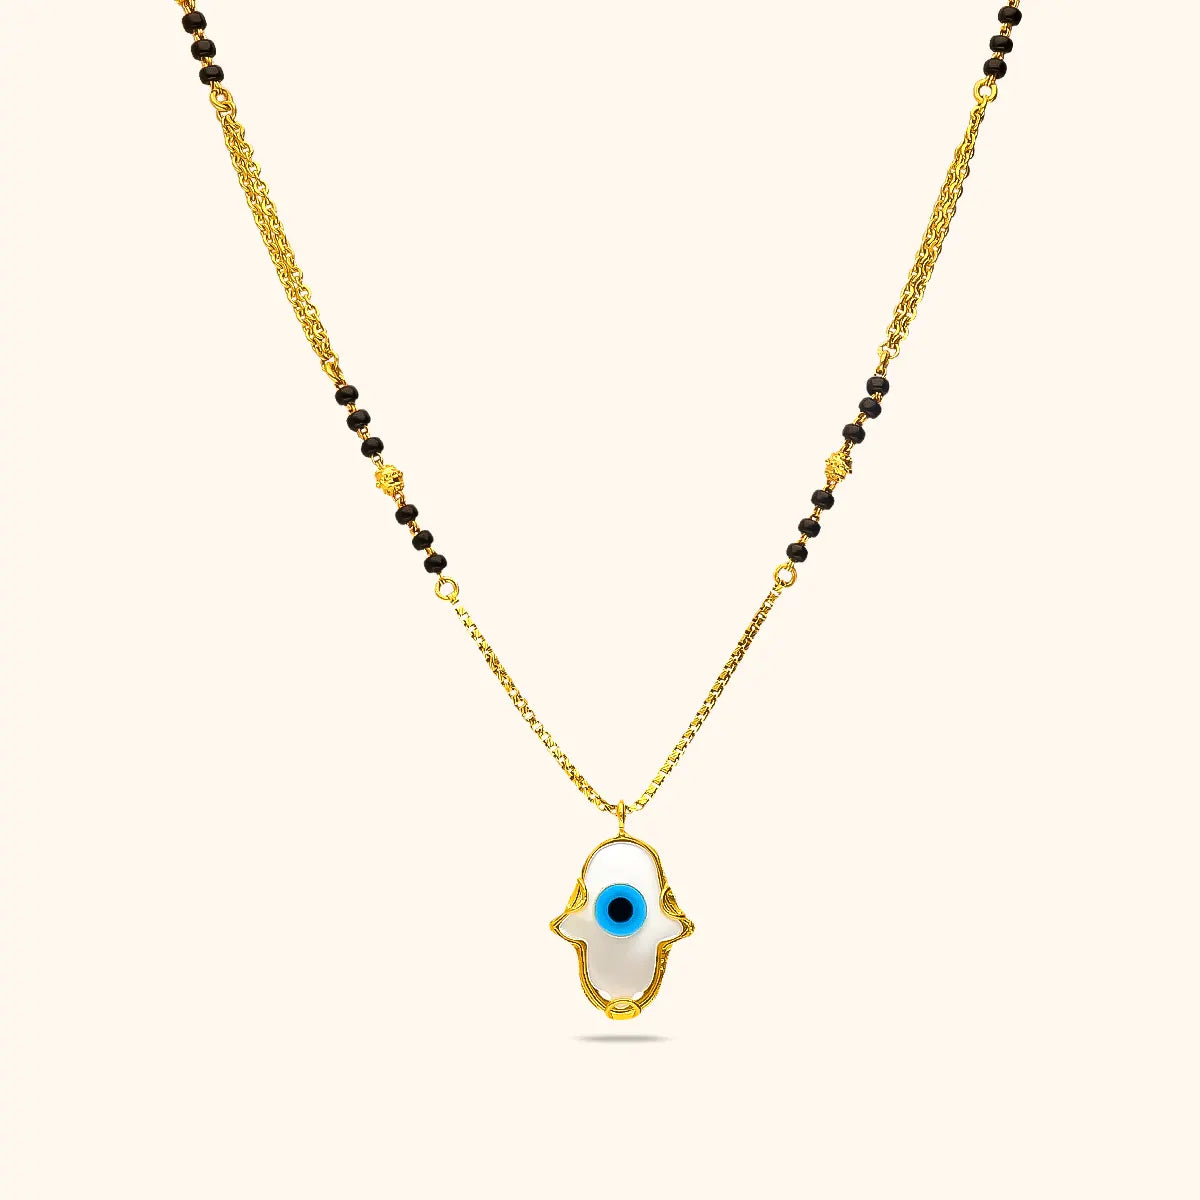 Divine Eye Mangalsutra: Ward off Negativity and Invite Positive Energy